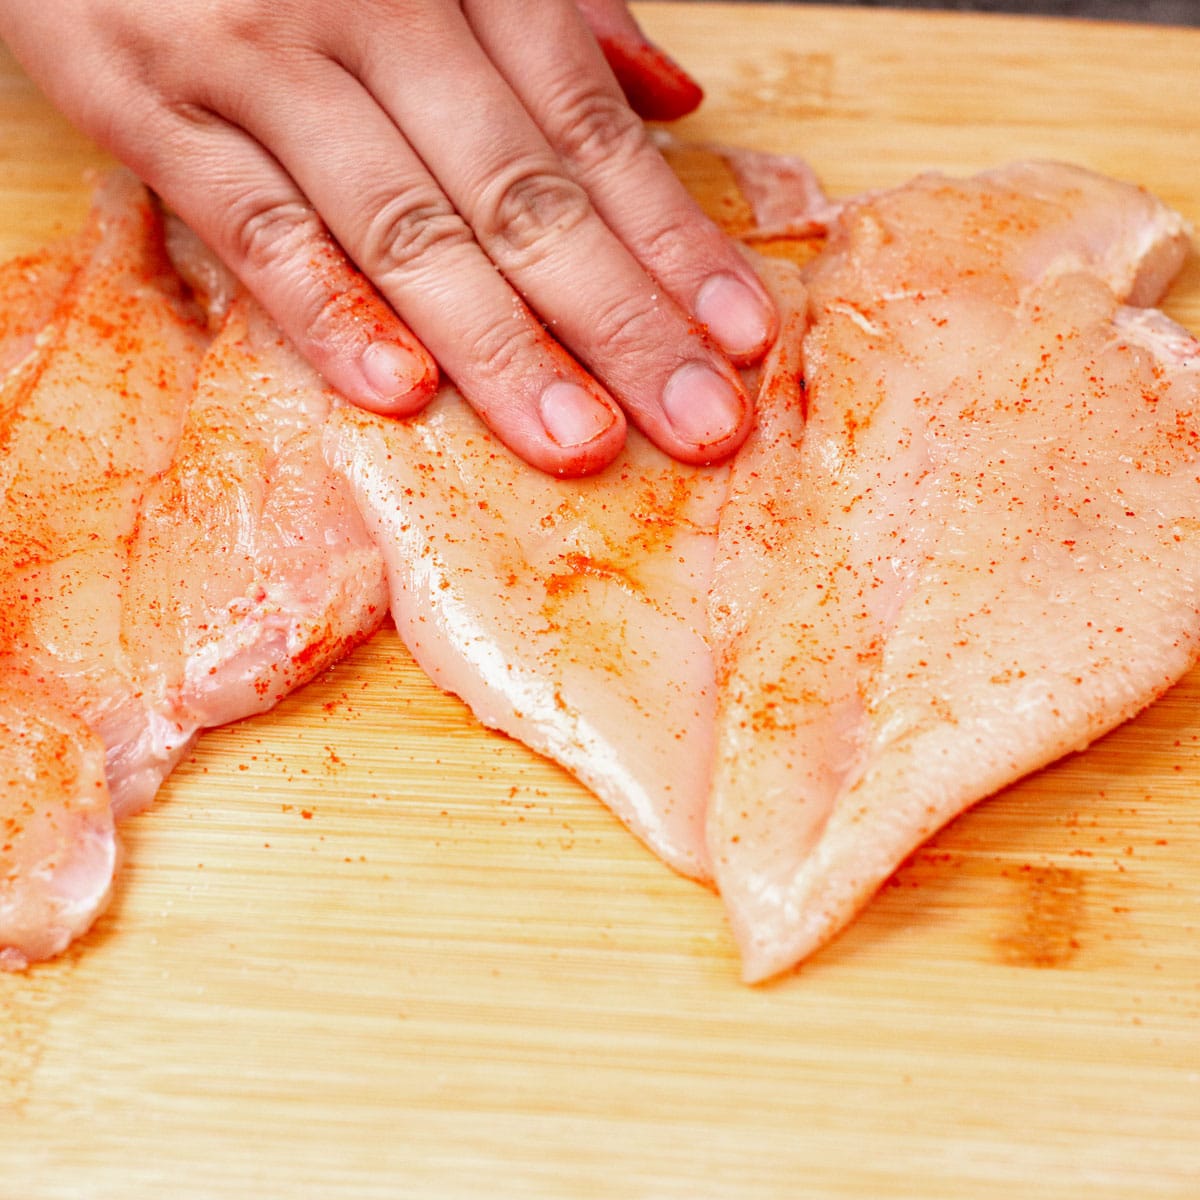 Seasoning chicken breast with paprika and salt